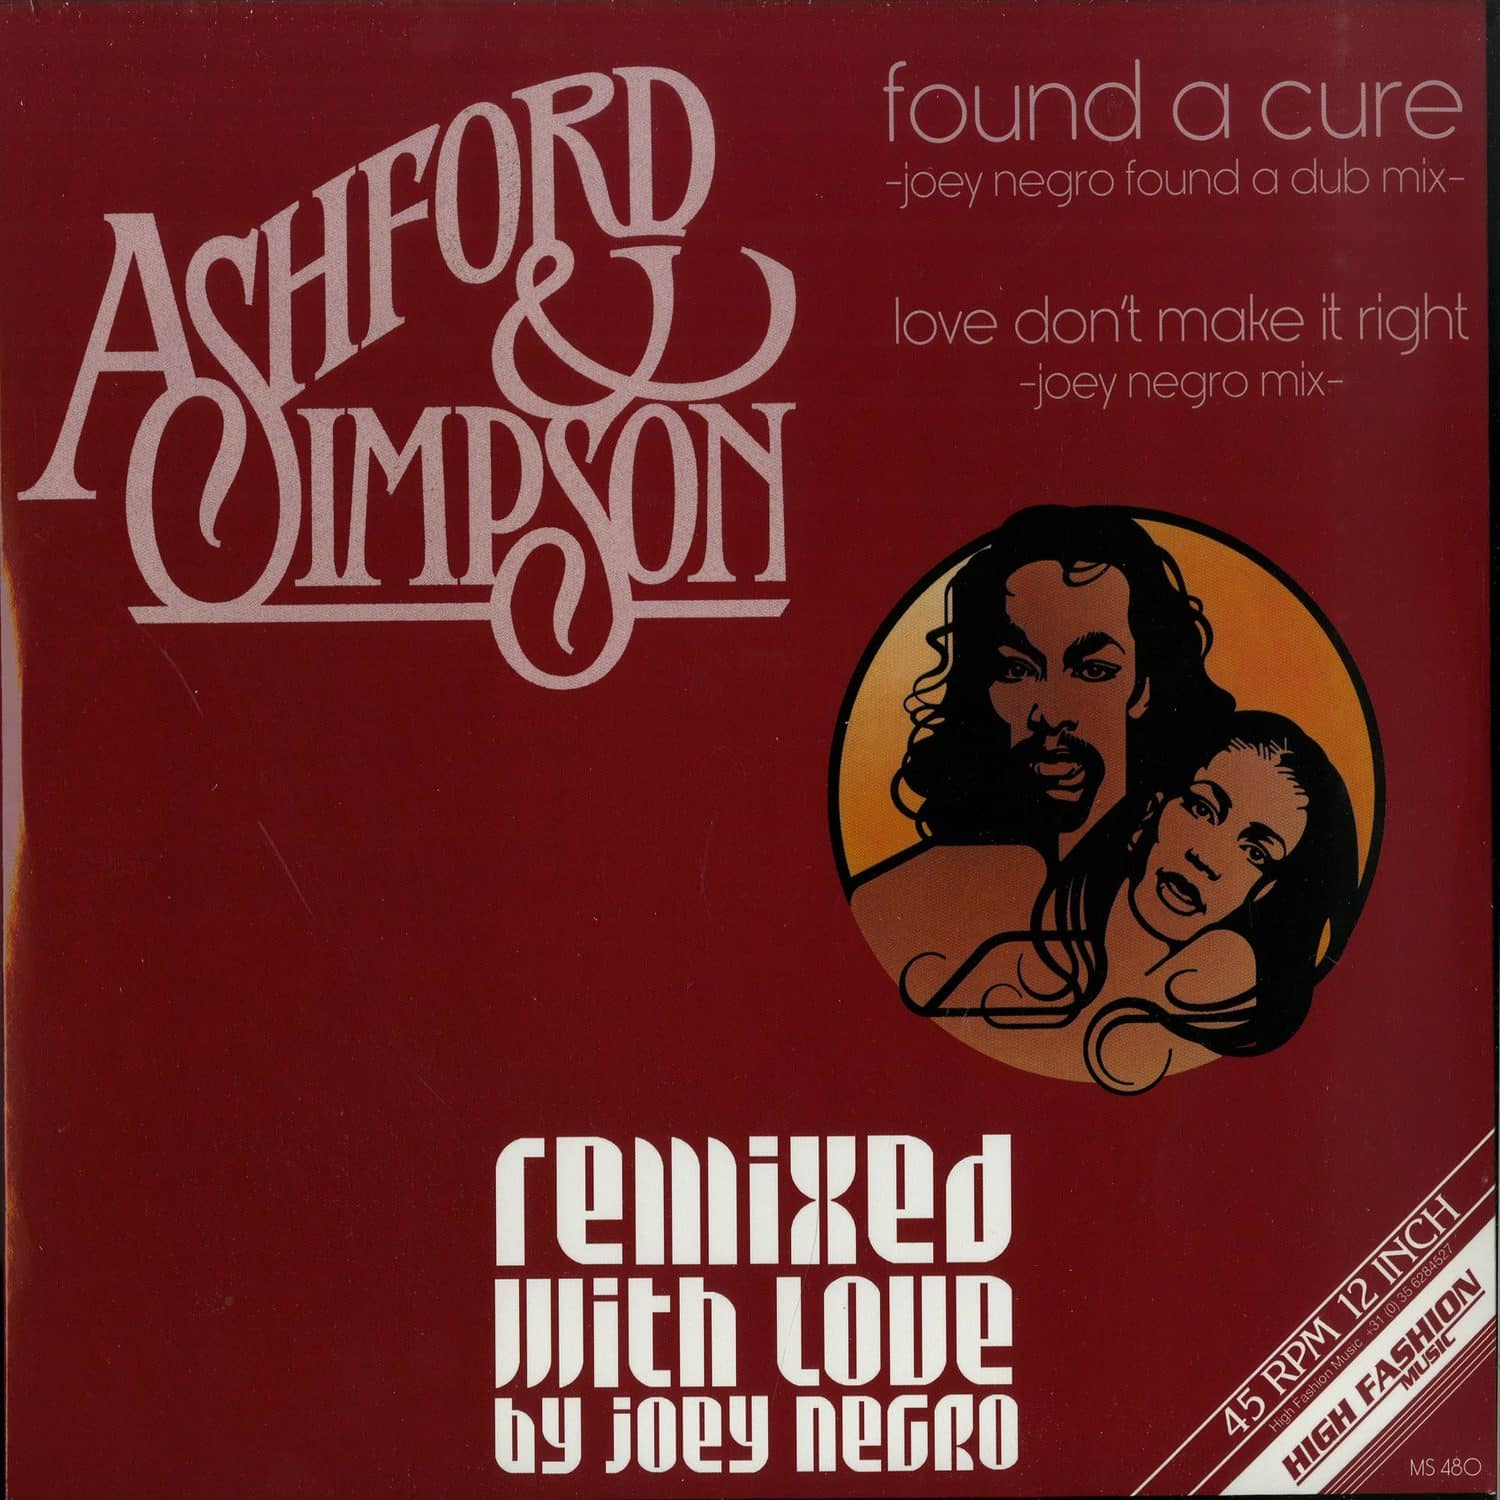 Ashford & Simpson - FOUND A CURE / LOVE DONT MAKE IT RIGHT 